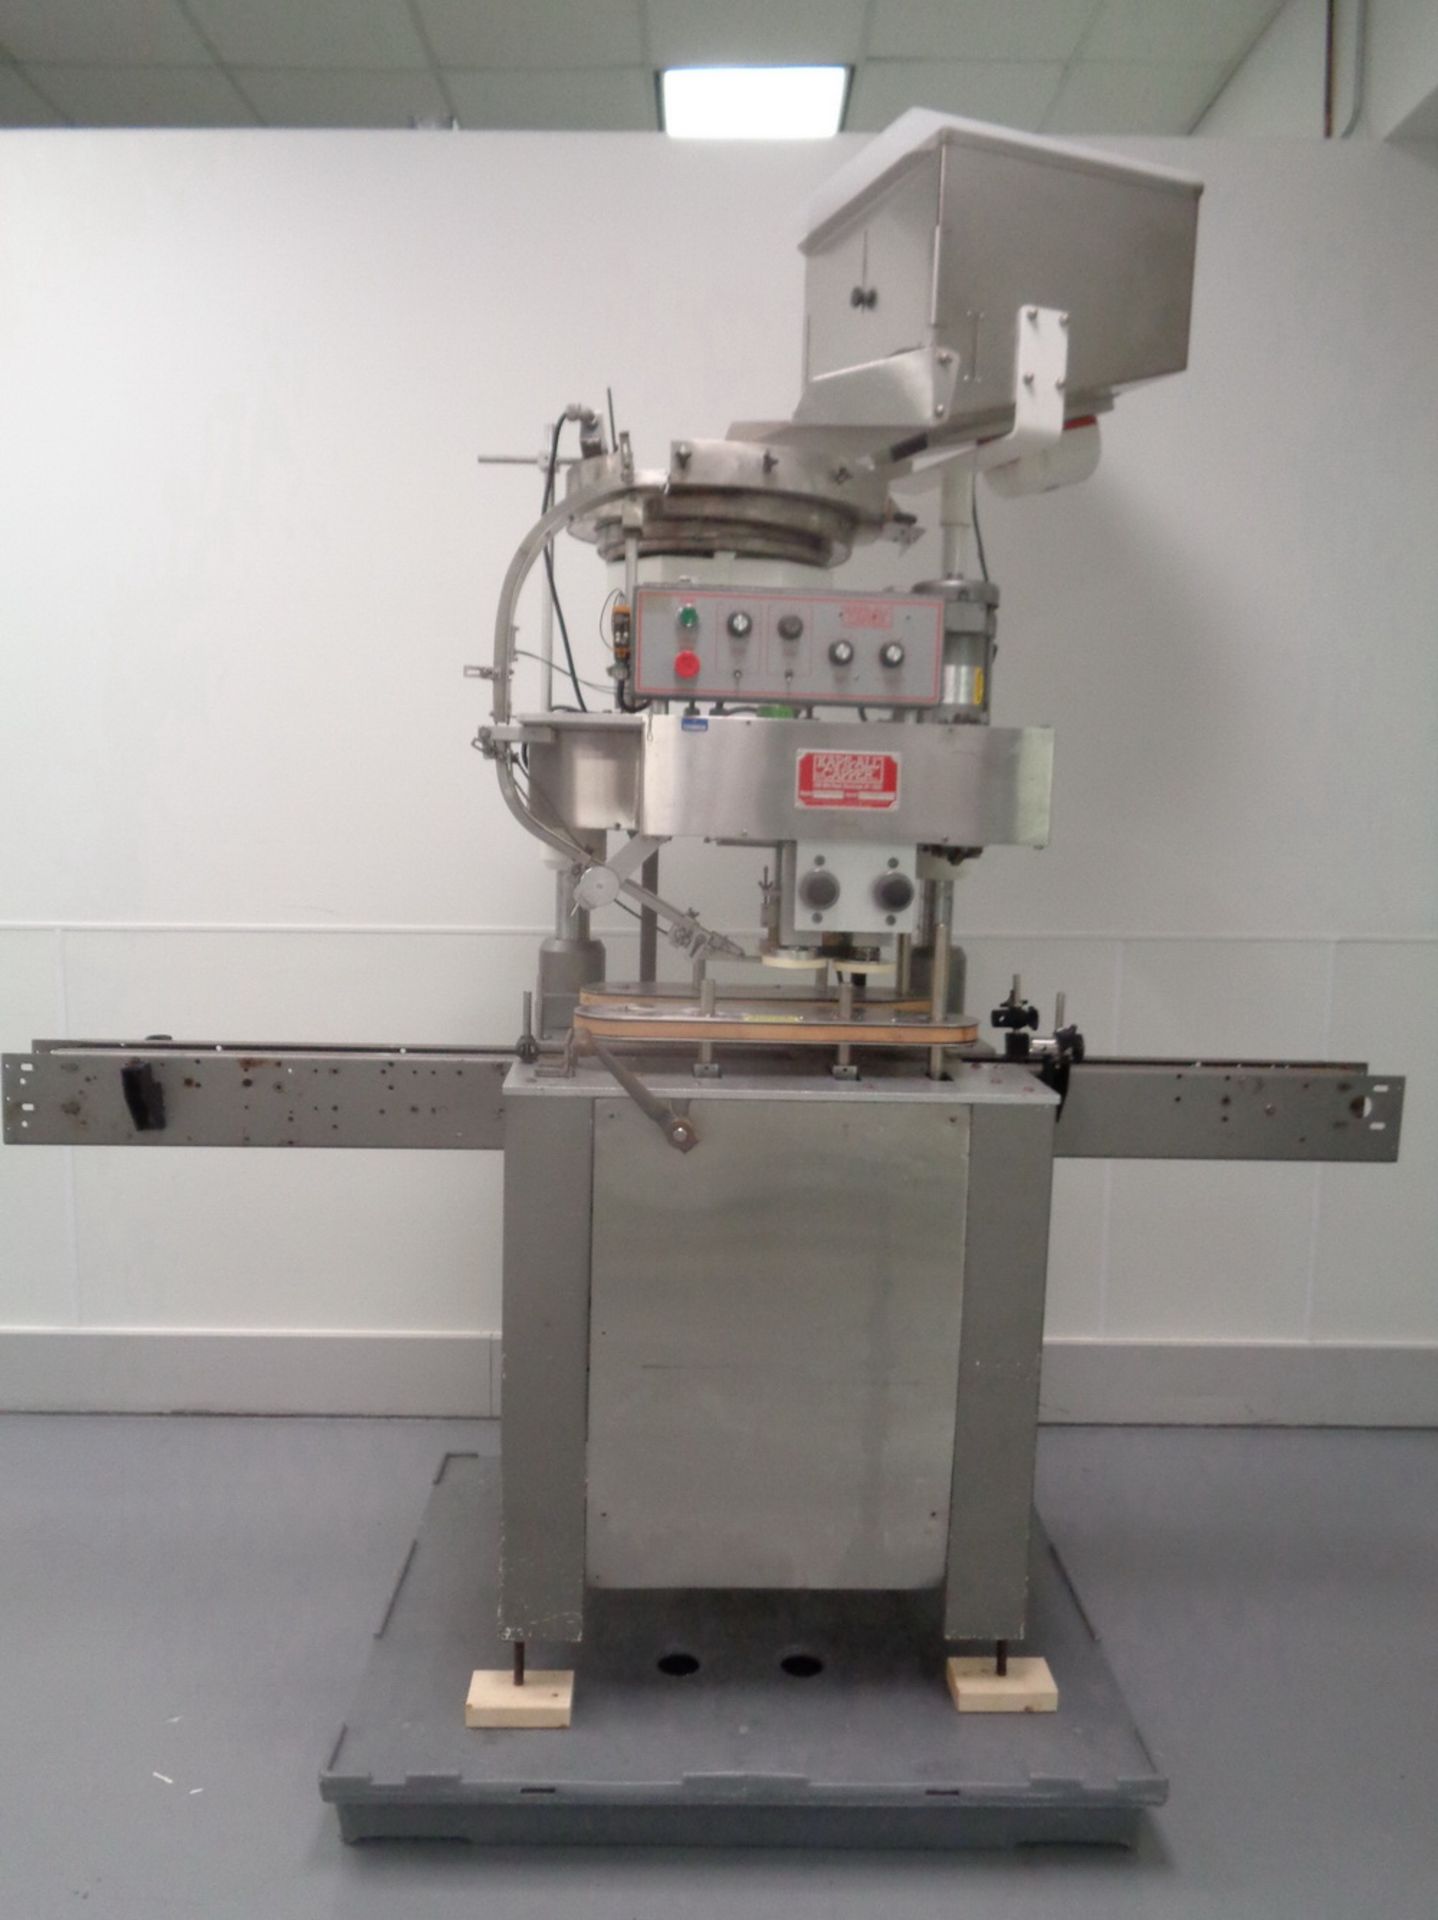 KAPS-ALL CAPPER, CONTINUOUS MOTION 4 SPINDLE TYPE, MODEL D, SERIAL NUMBER 2415.